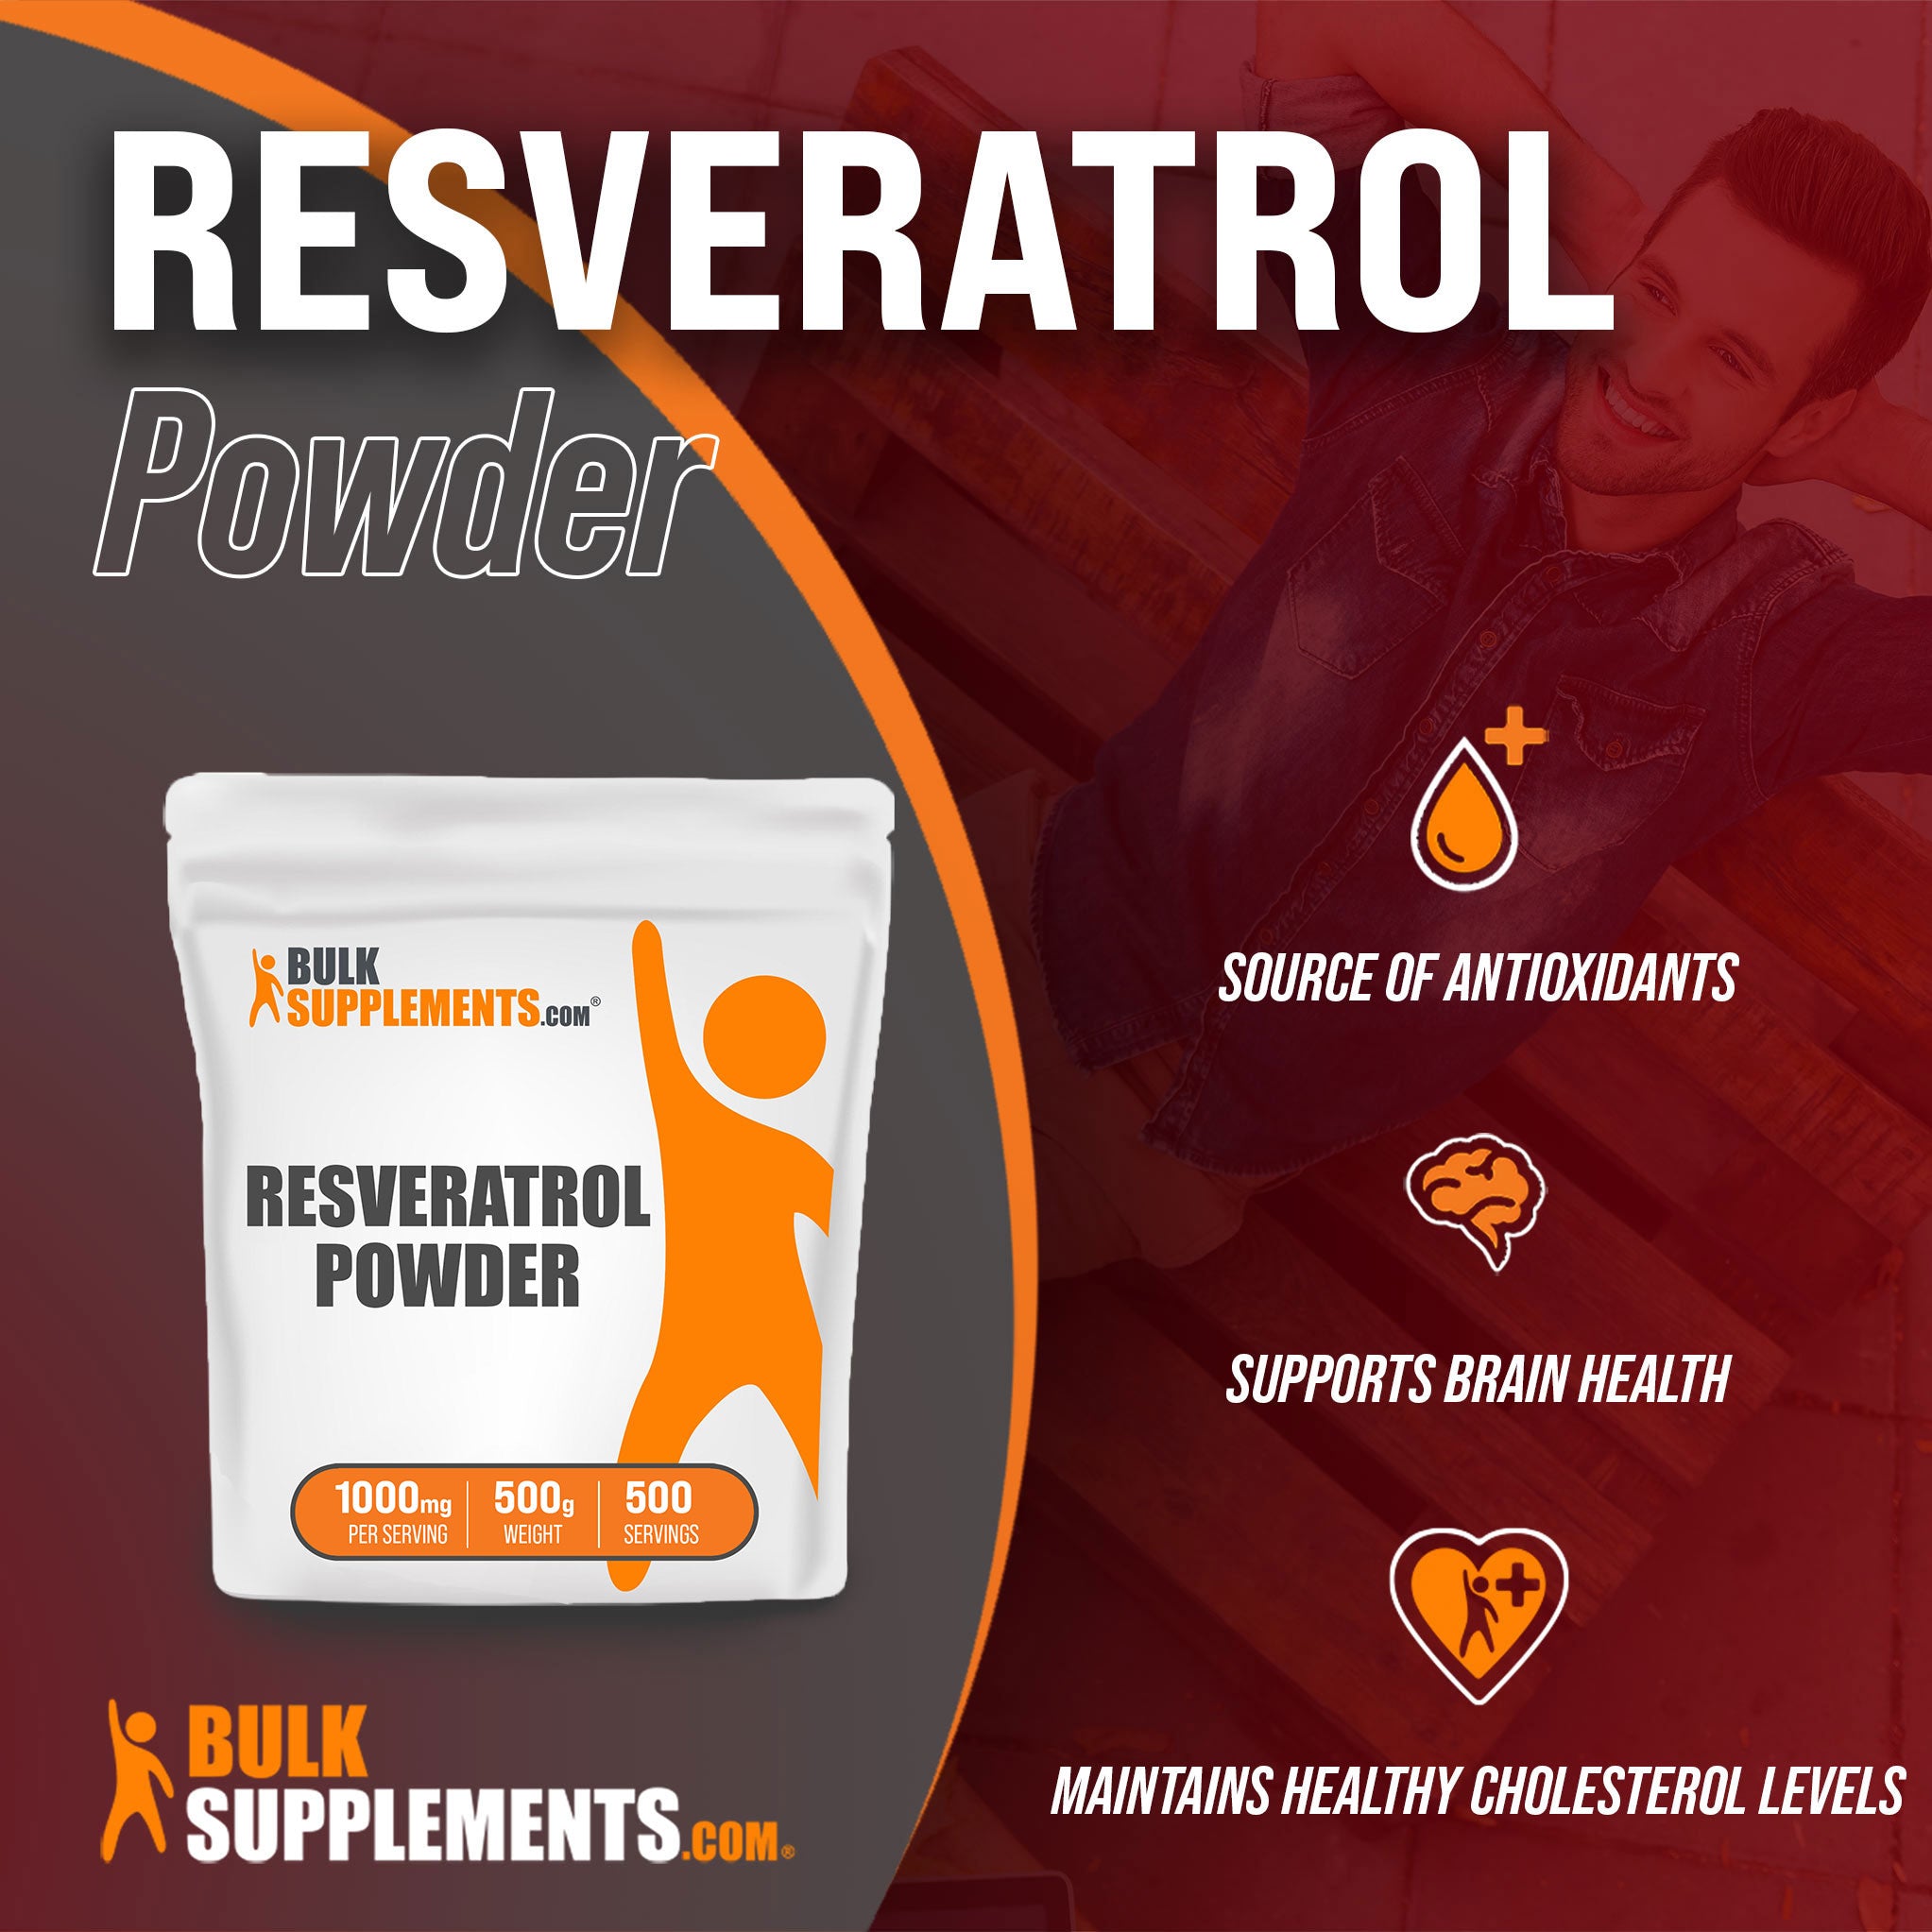 Benefits of Resveratrol: source of antioxidants, supports brain health, maintains healthy cholesterol levels